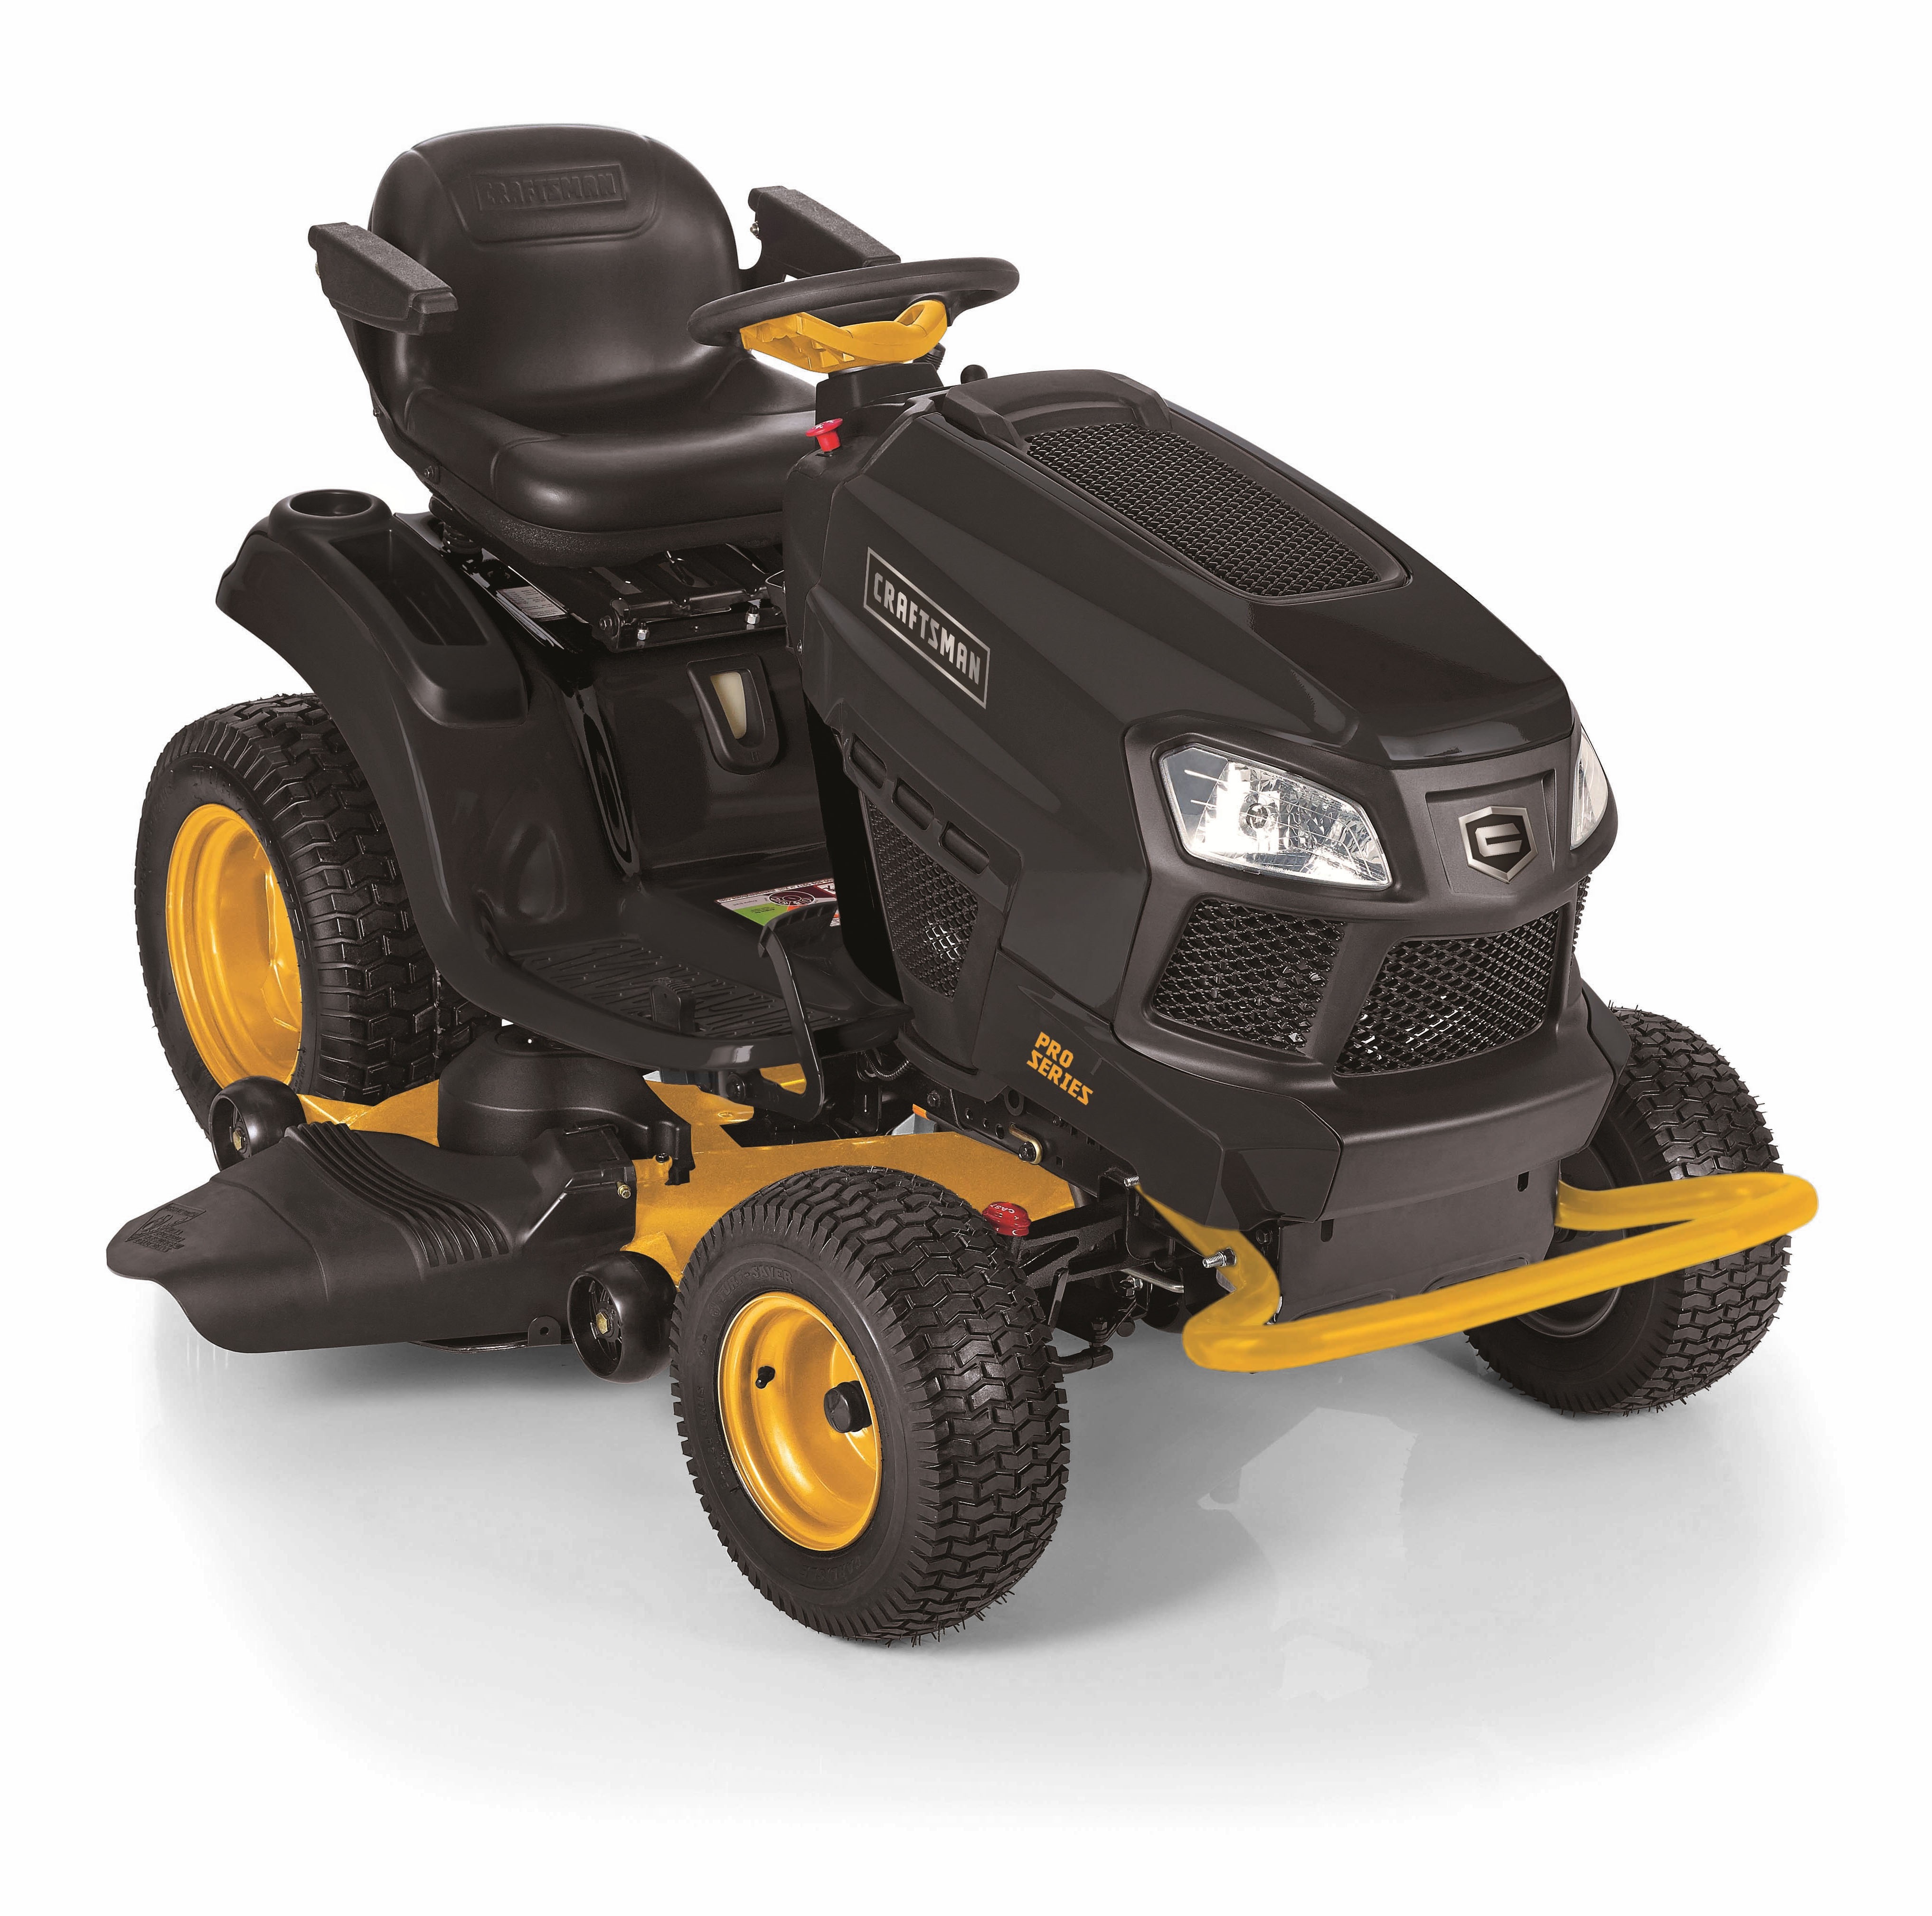 Craftsman PRO 10134 46" Riding Lawn Tractor